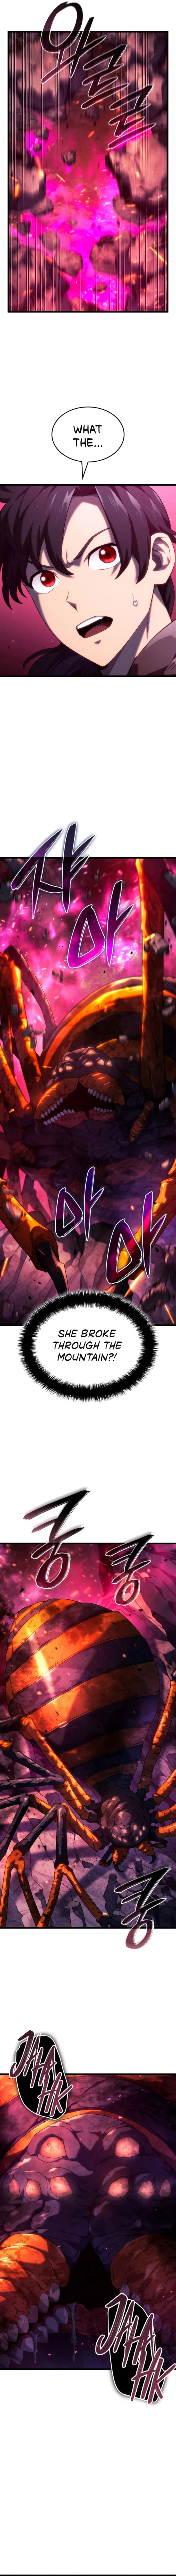 Revenge of the Iron-Blooded Sword Hound - Chapter 59 Page 7